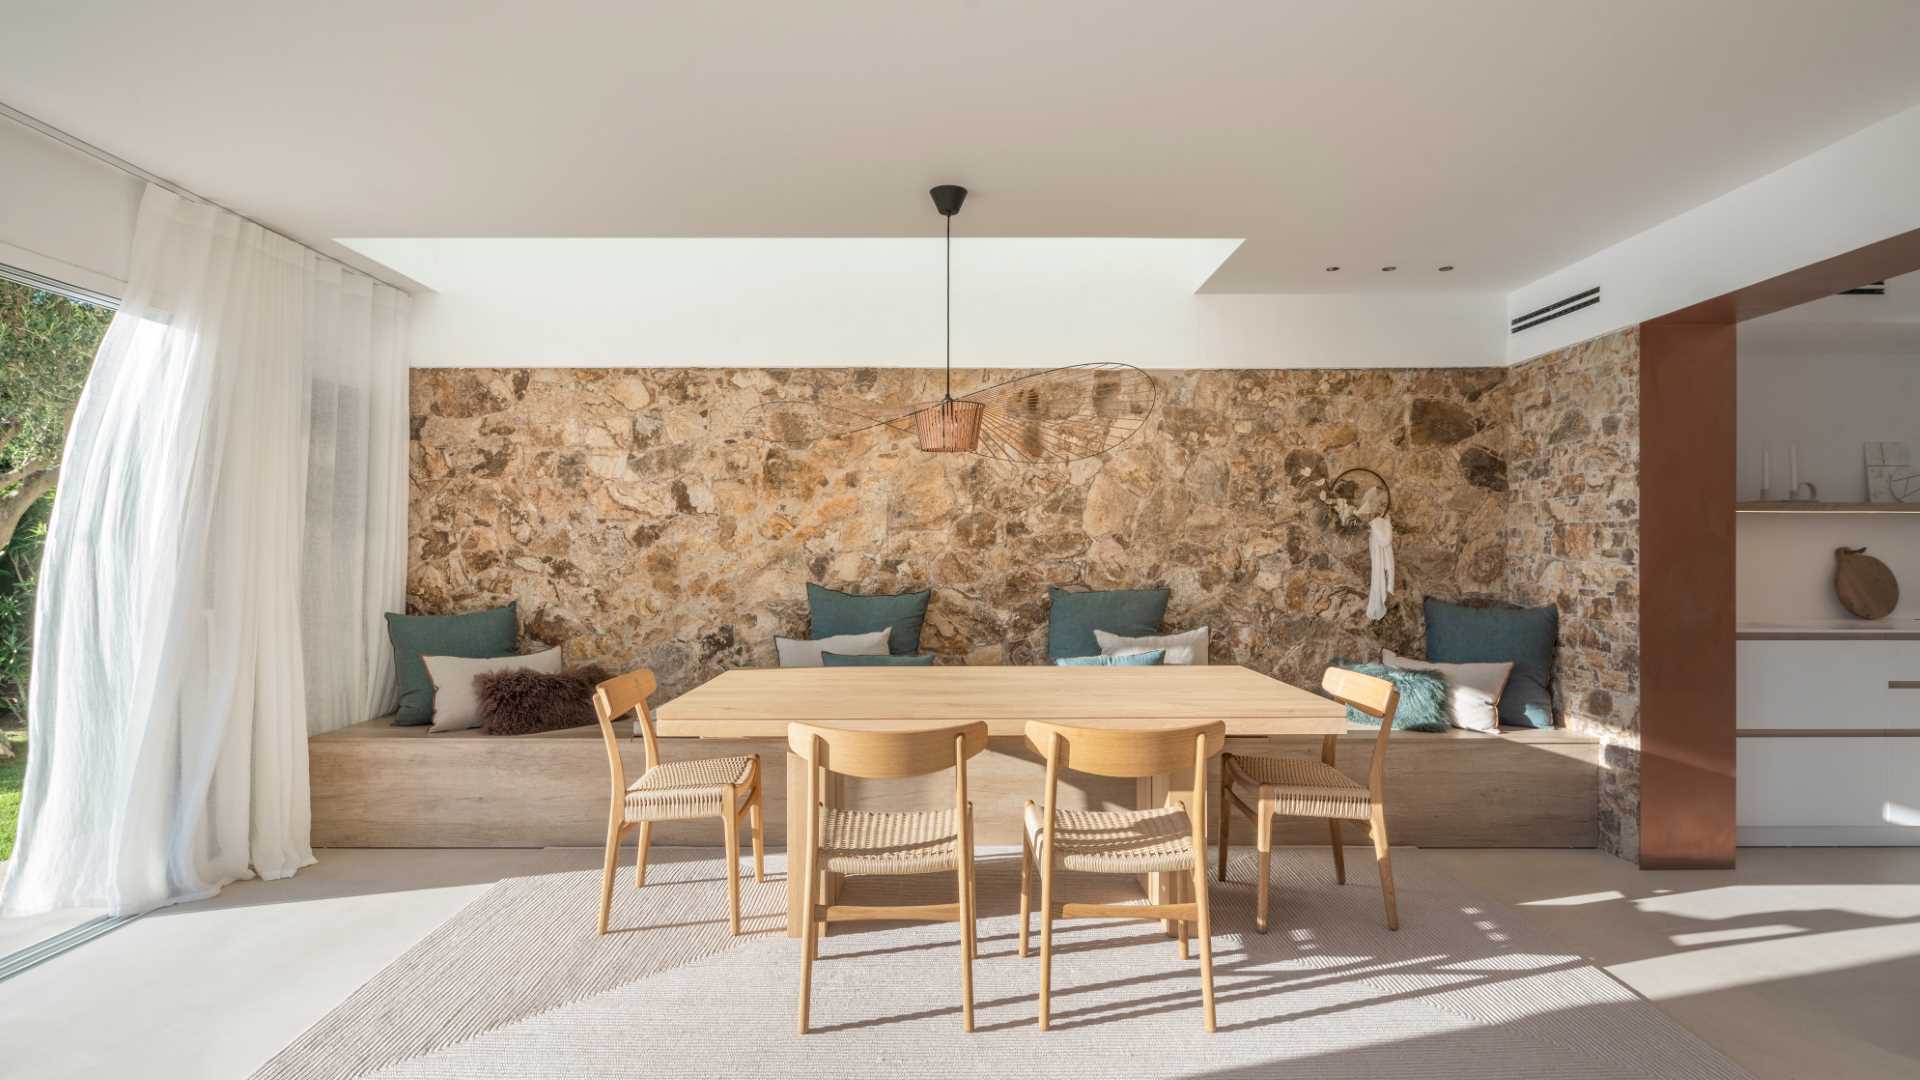 A modern dining room with a skylight, a stone accent wall, and a long built-in bench that acts as seating for the dining table.